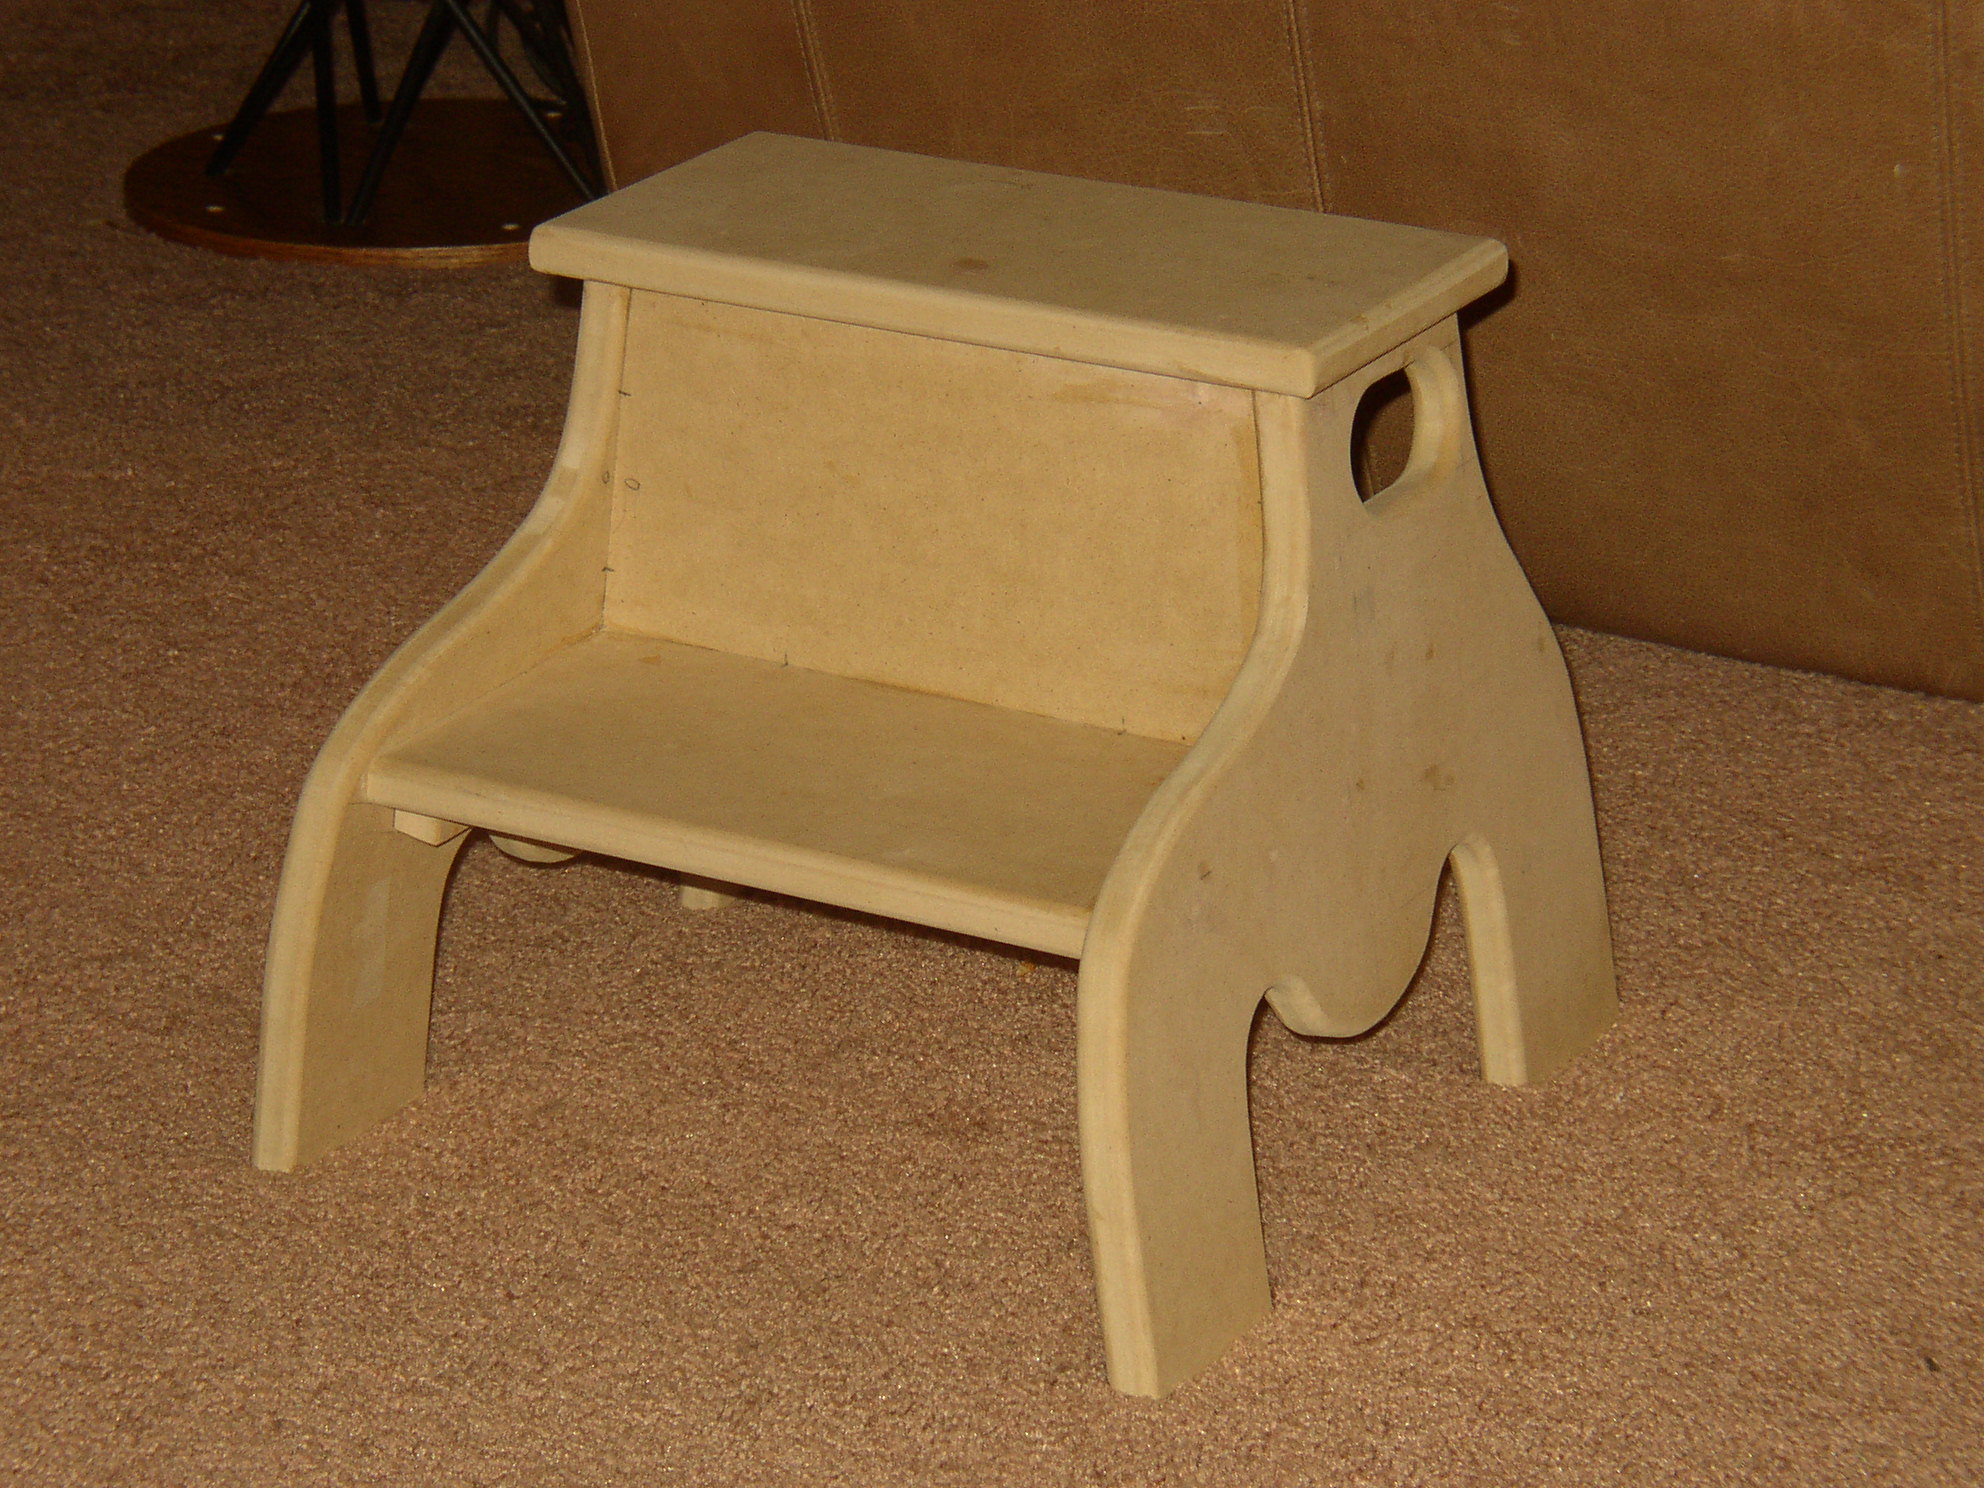 Step stool for niece